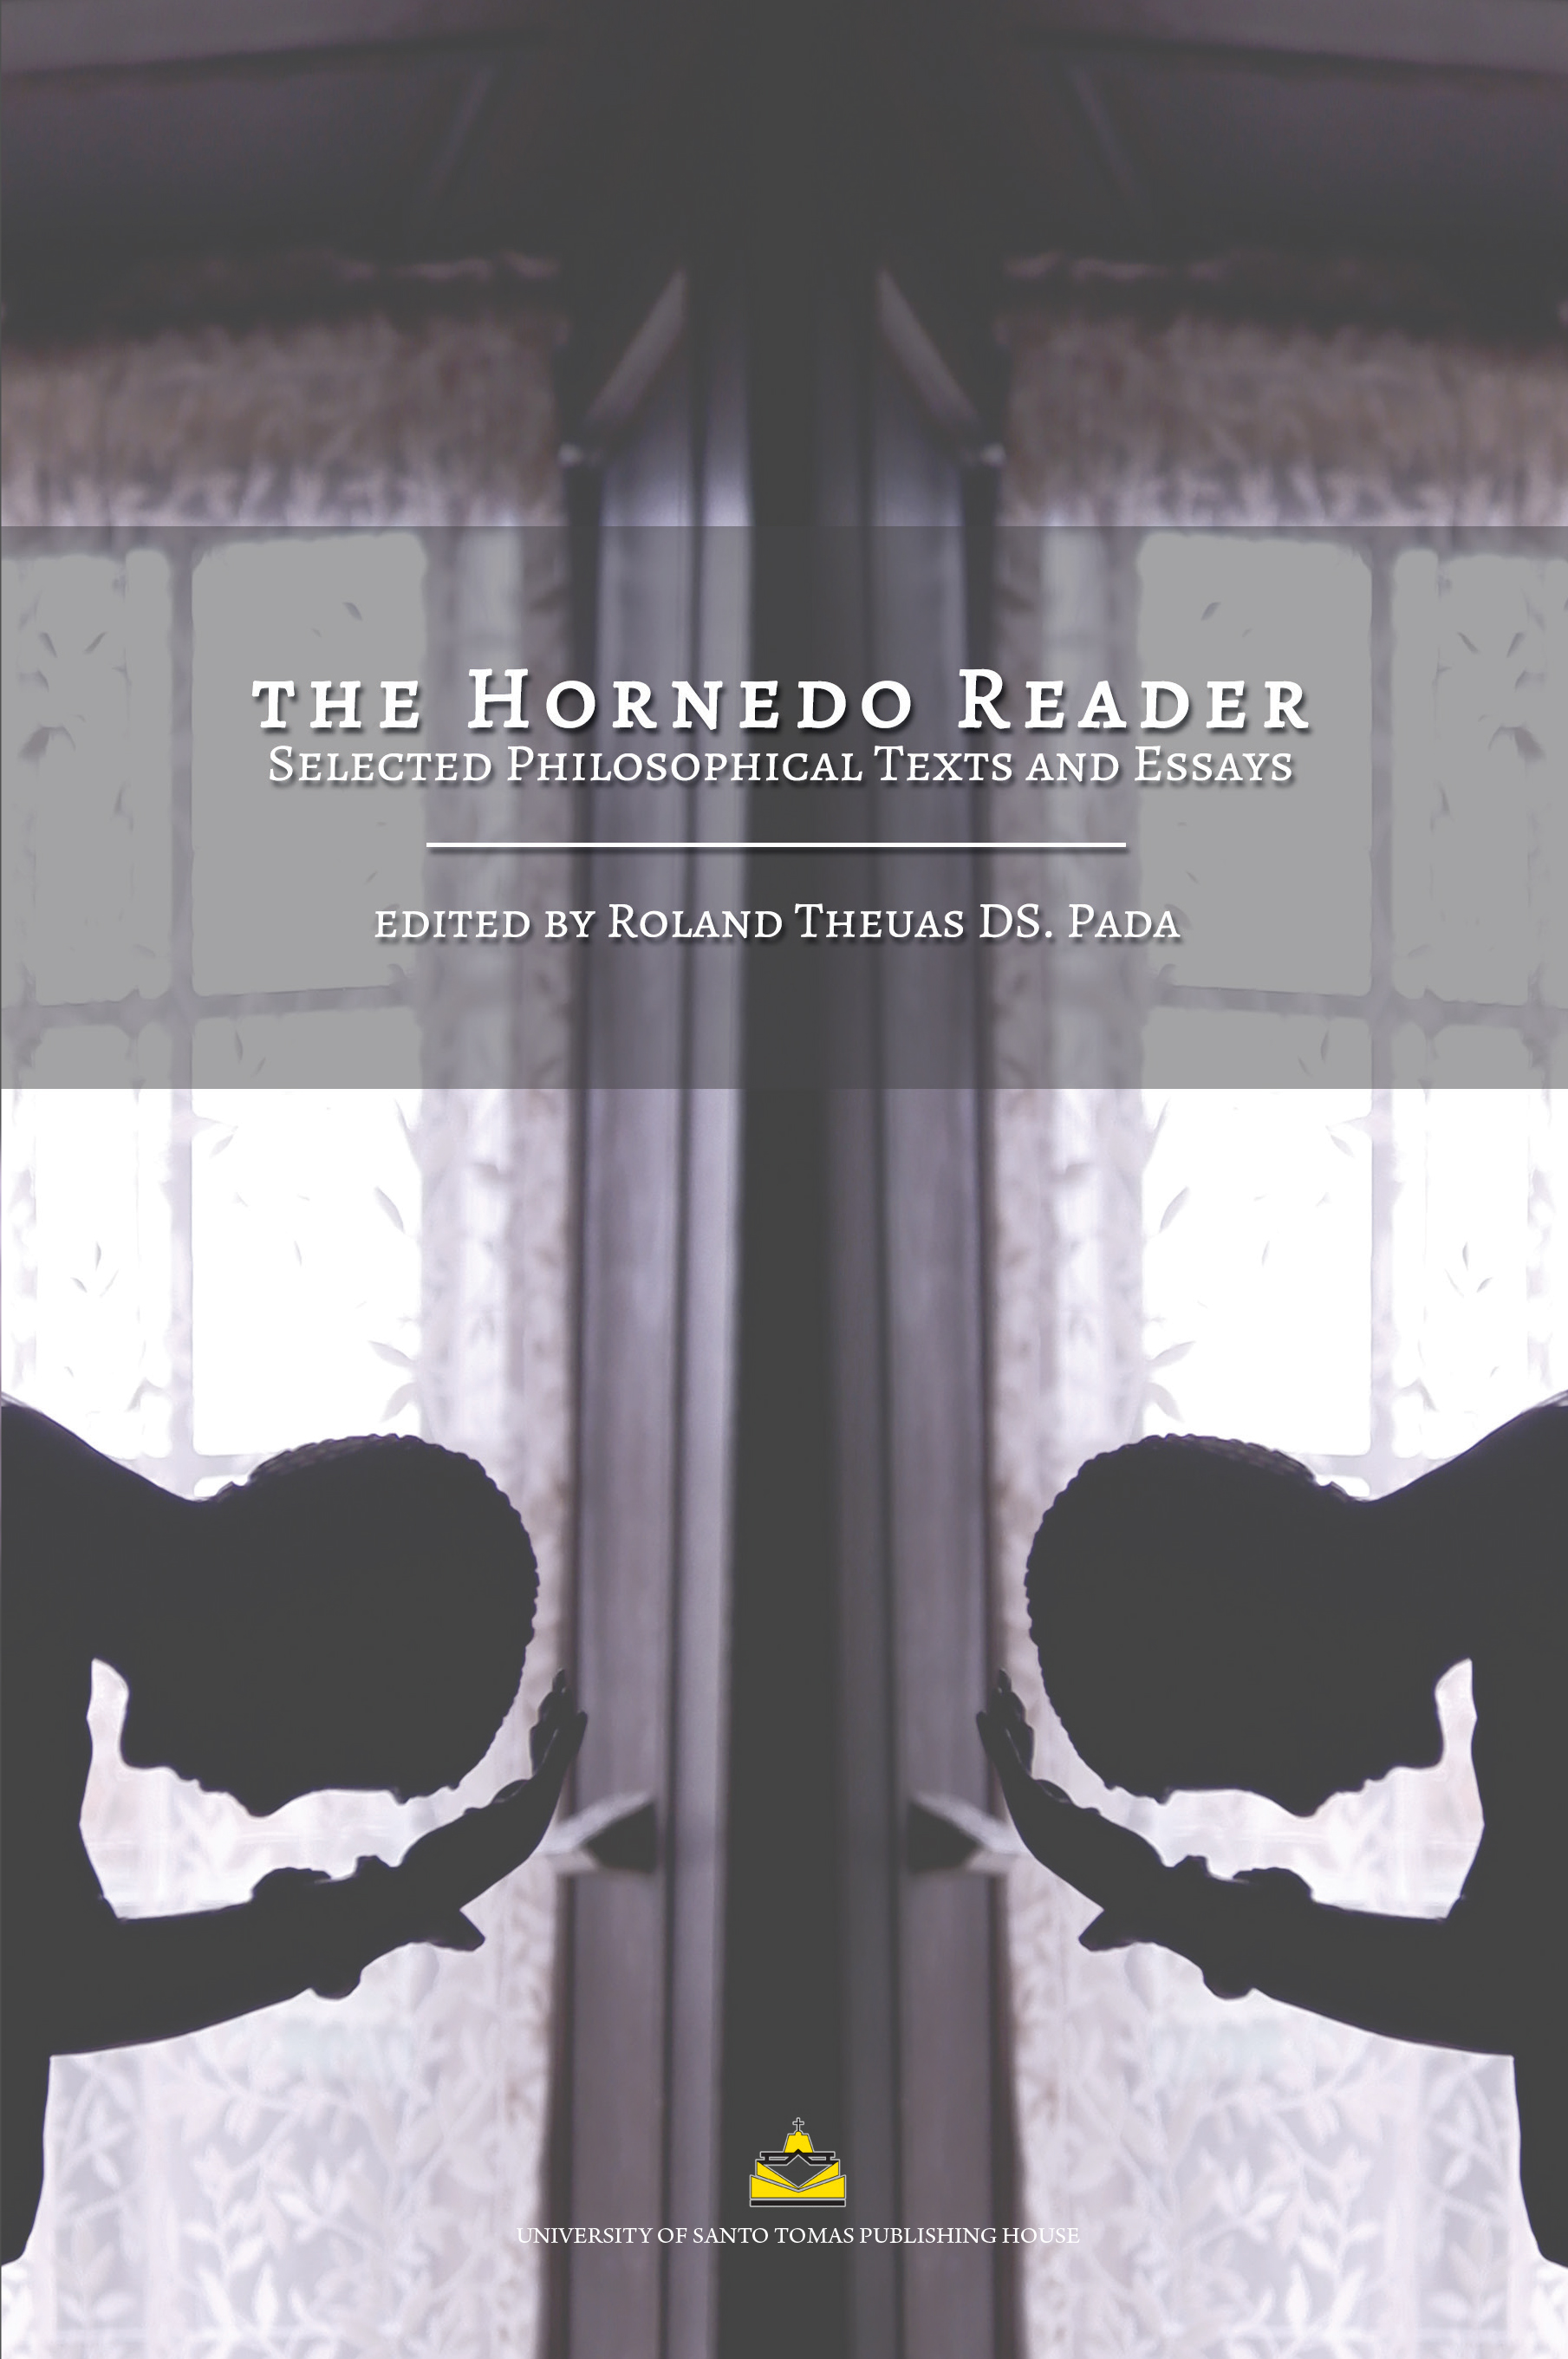 The Hornedo reader selected philosophical texts and essays